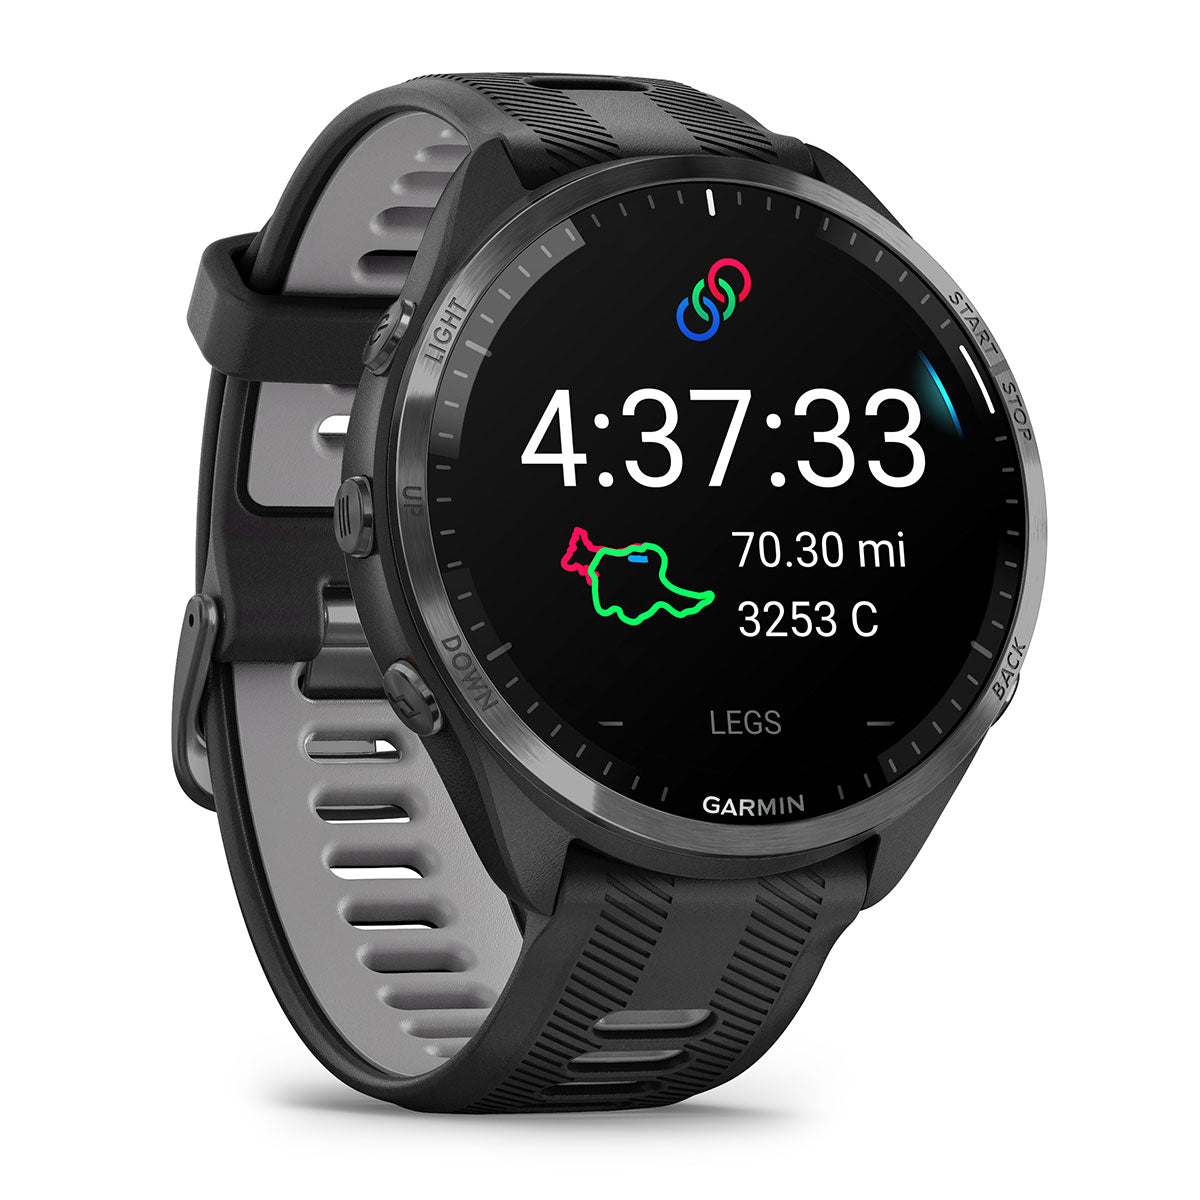 Garmin Forerunner 965 (Black/Powder Gray) Premium Running GPS Smartwatch | Gift Box with PlayBetter HD Screen Protectors, Wall Adapter & Case - image 5 of 7